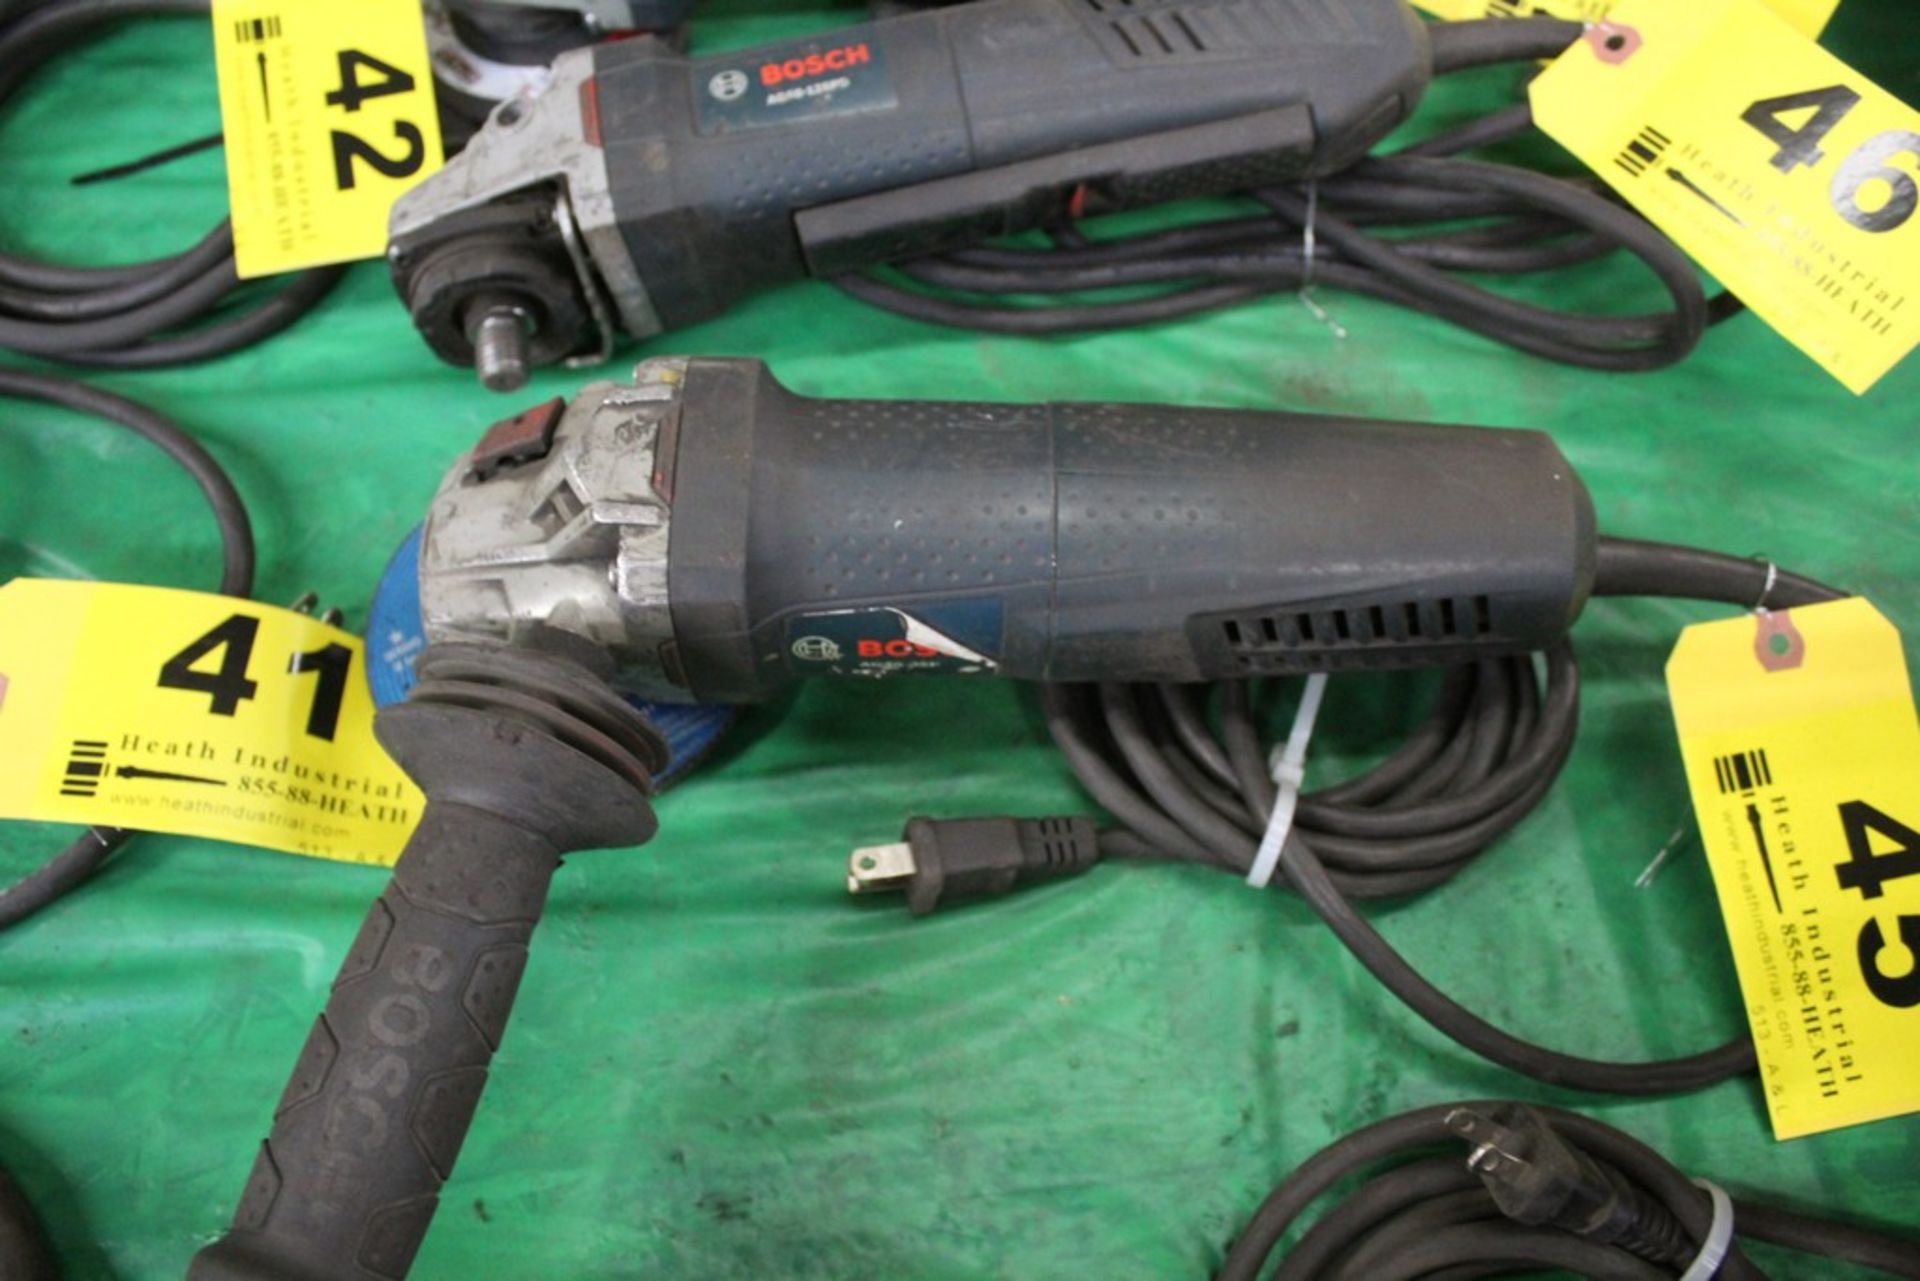 BOSCH MODEL AG40-35P ELECTRIC ANGLE GRINDER / BUFFER